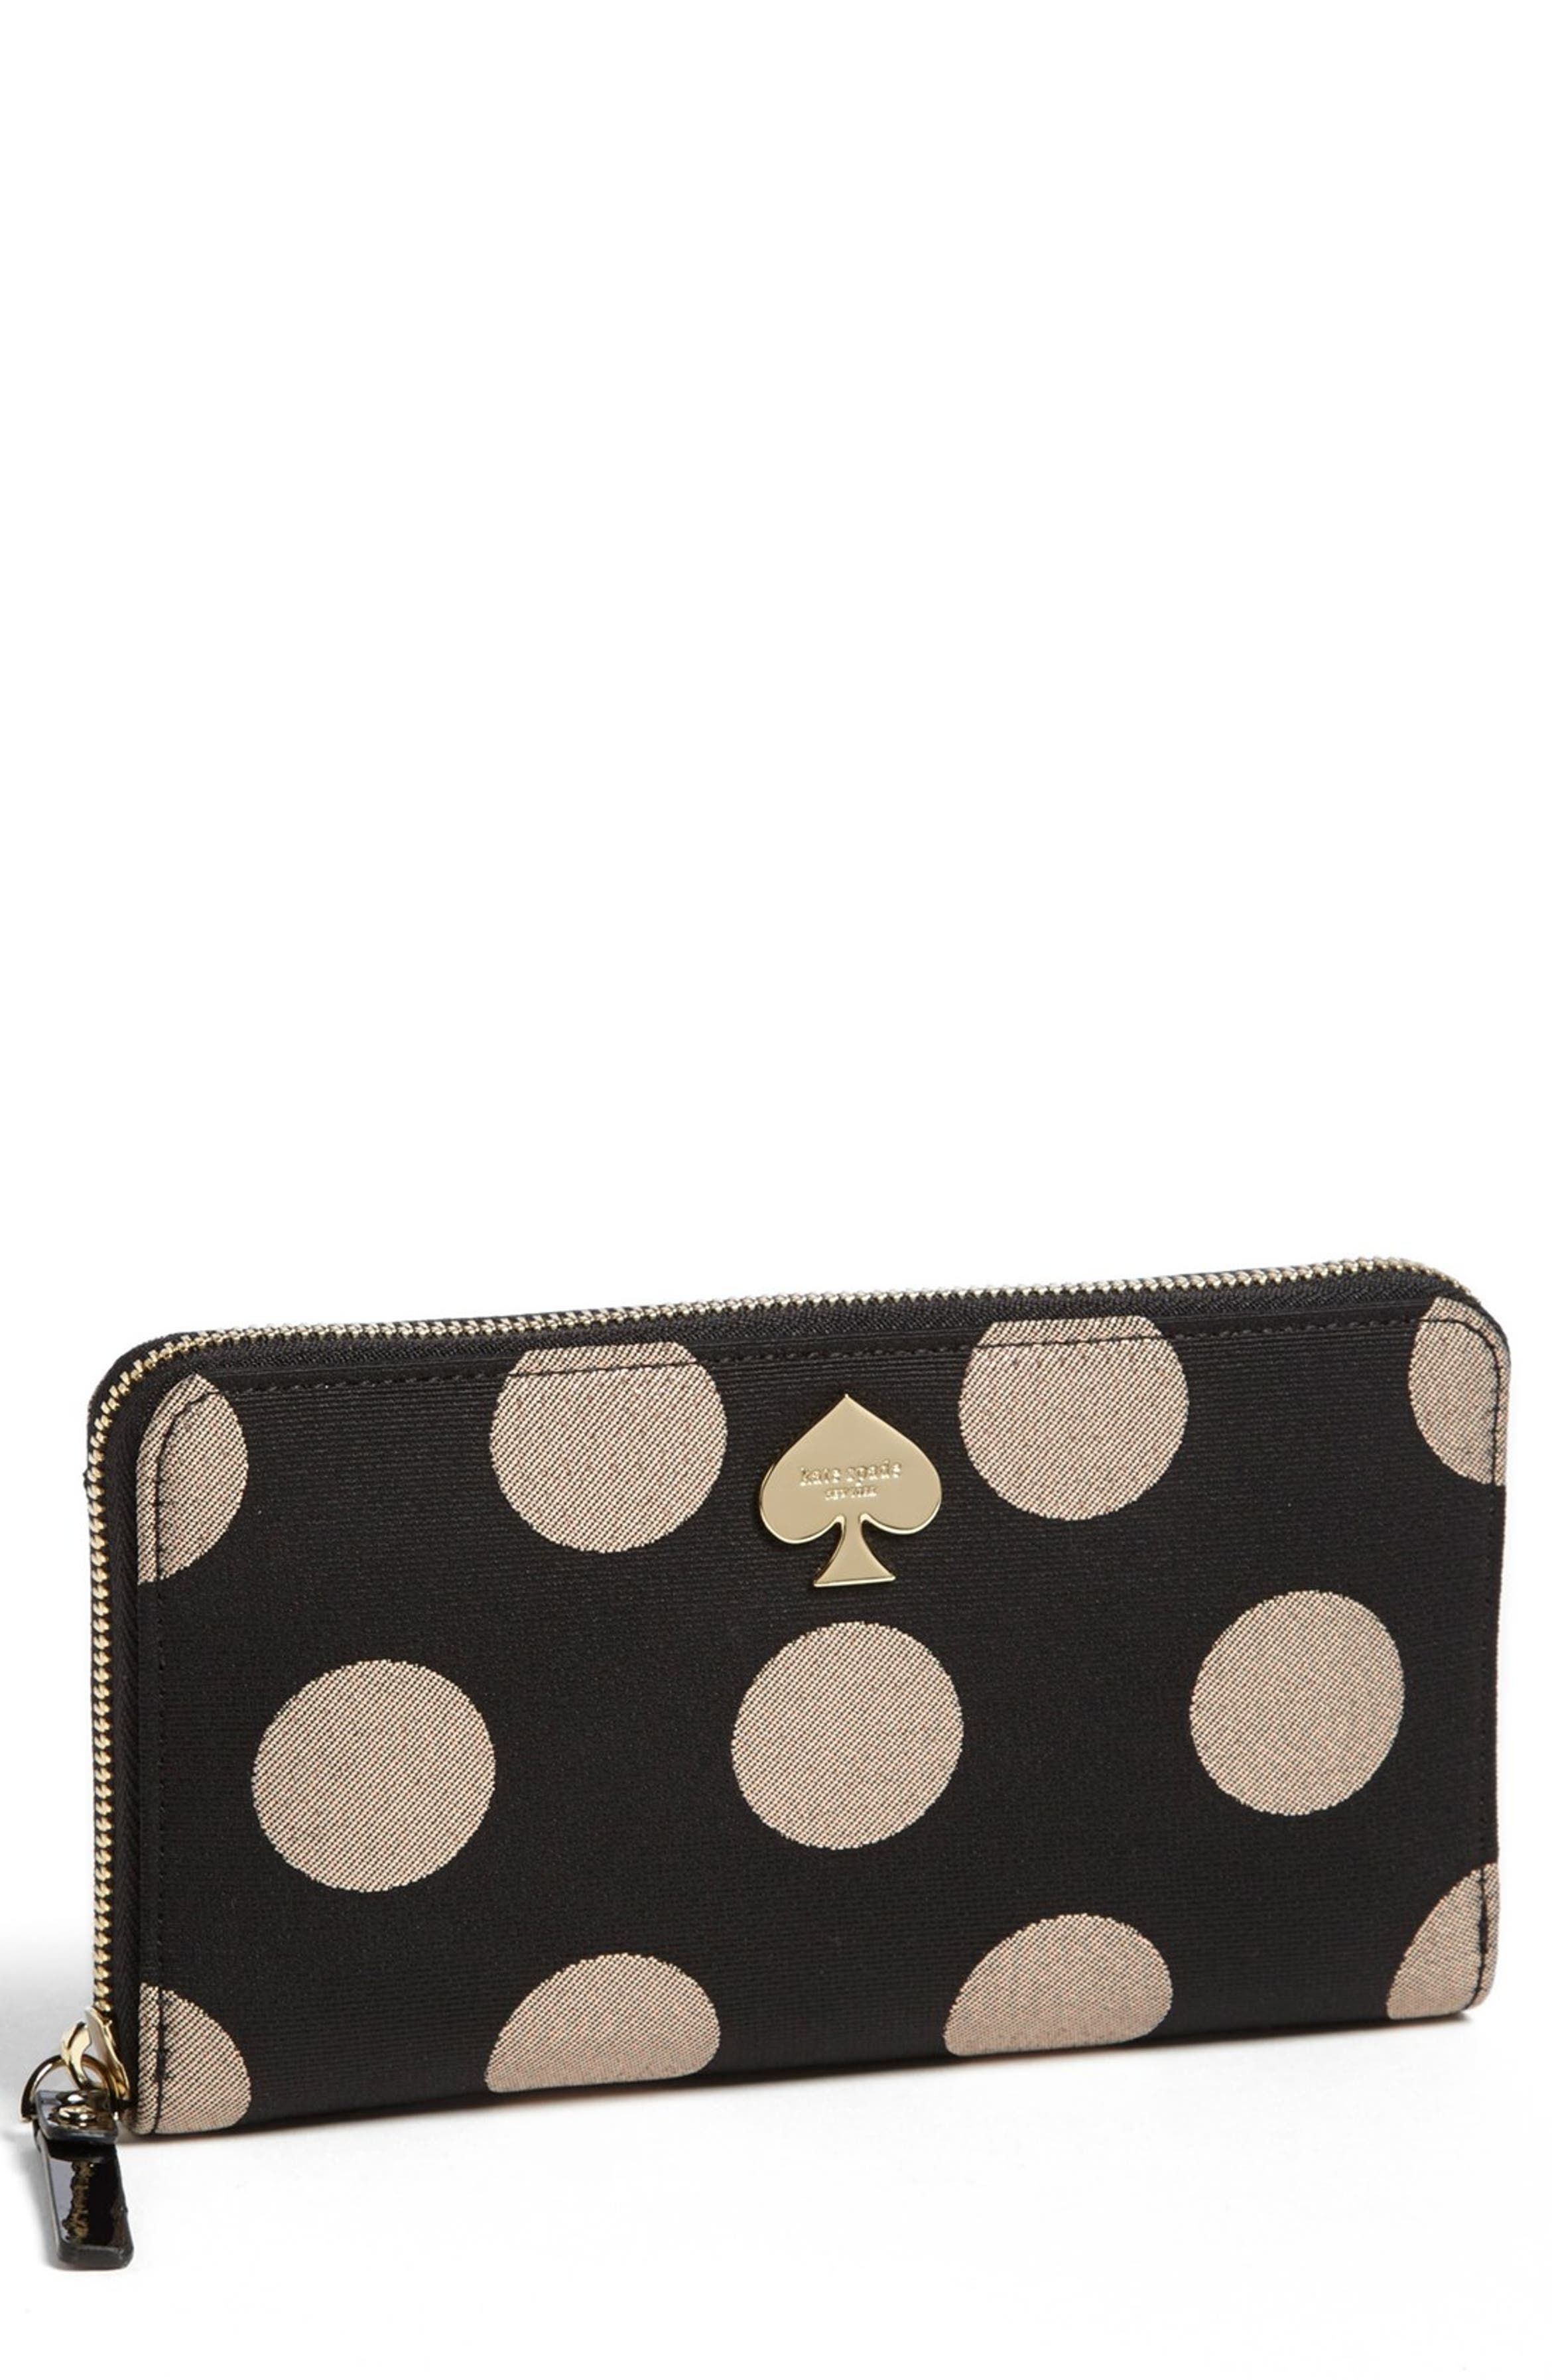 kate spade new york 'city slicker - lacey' wallet | Nordstrom